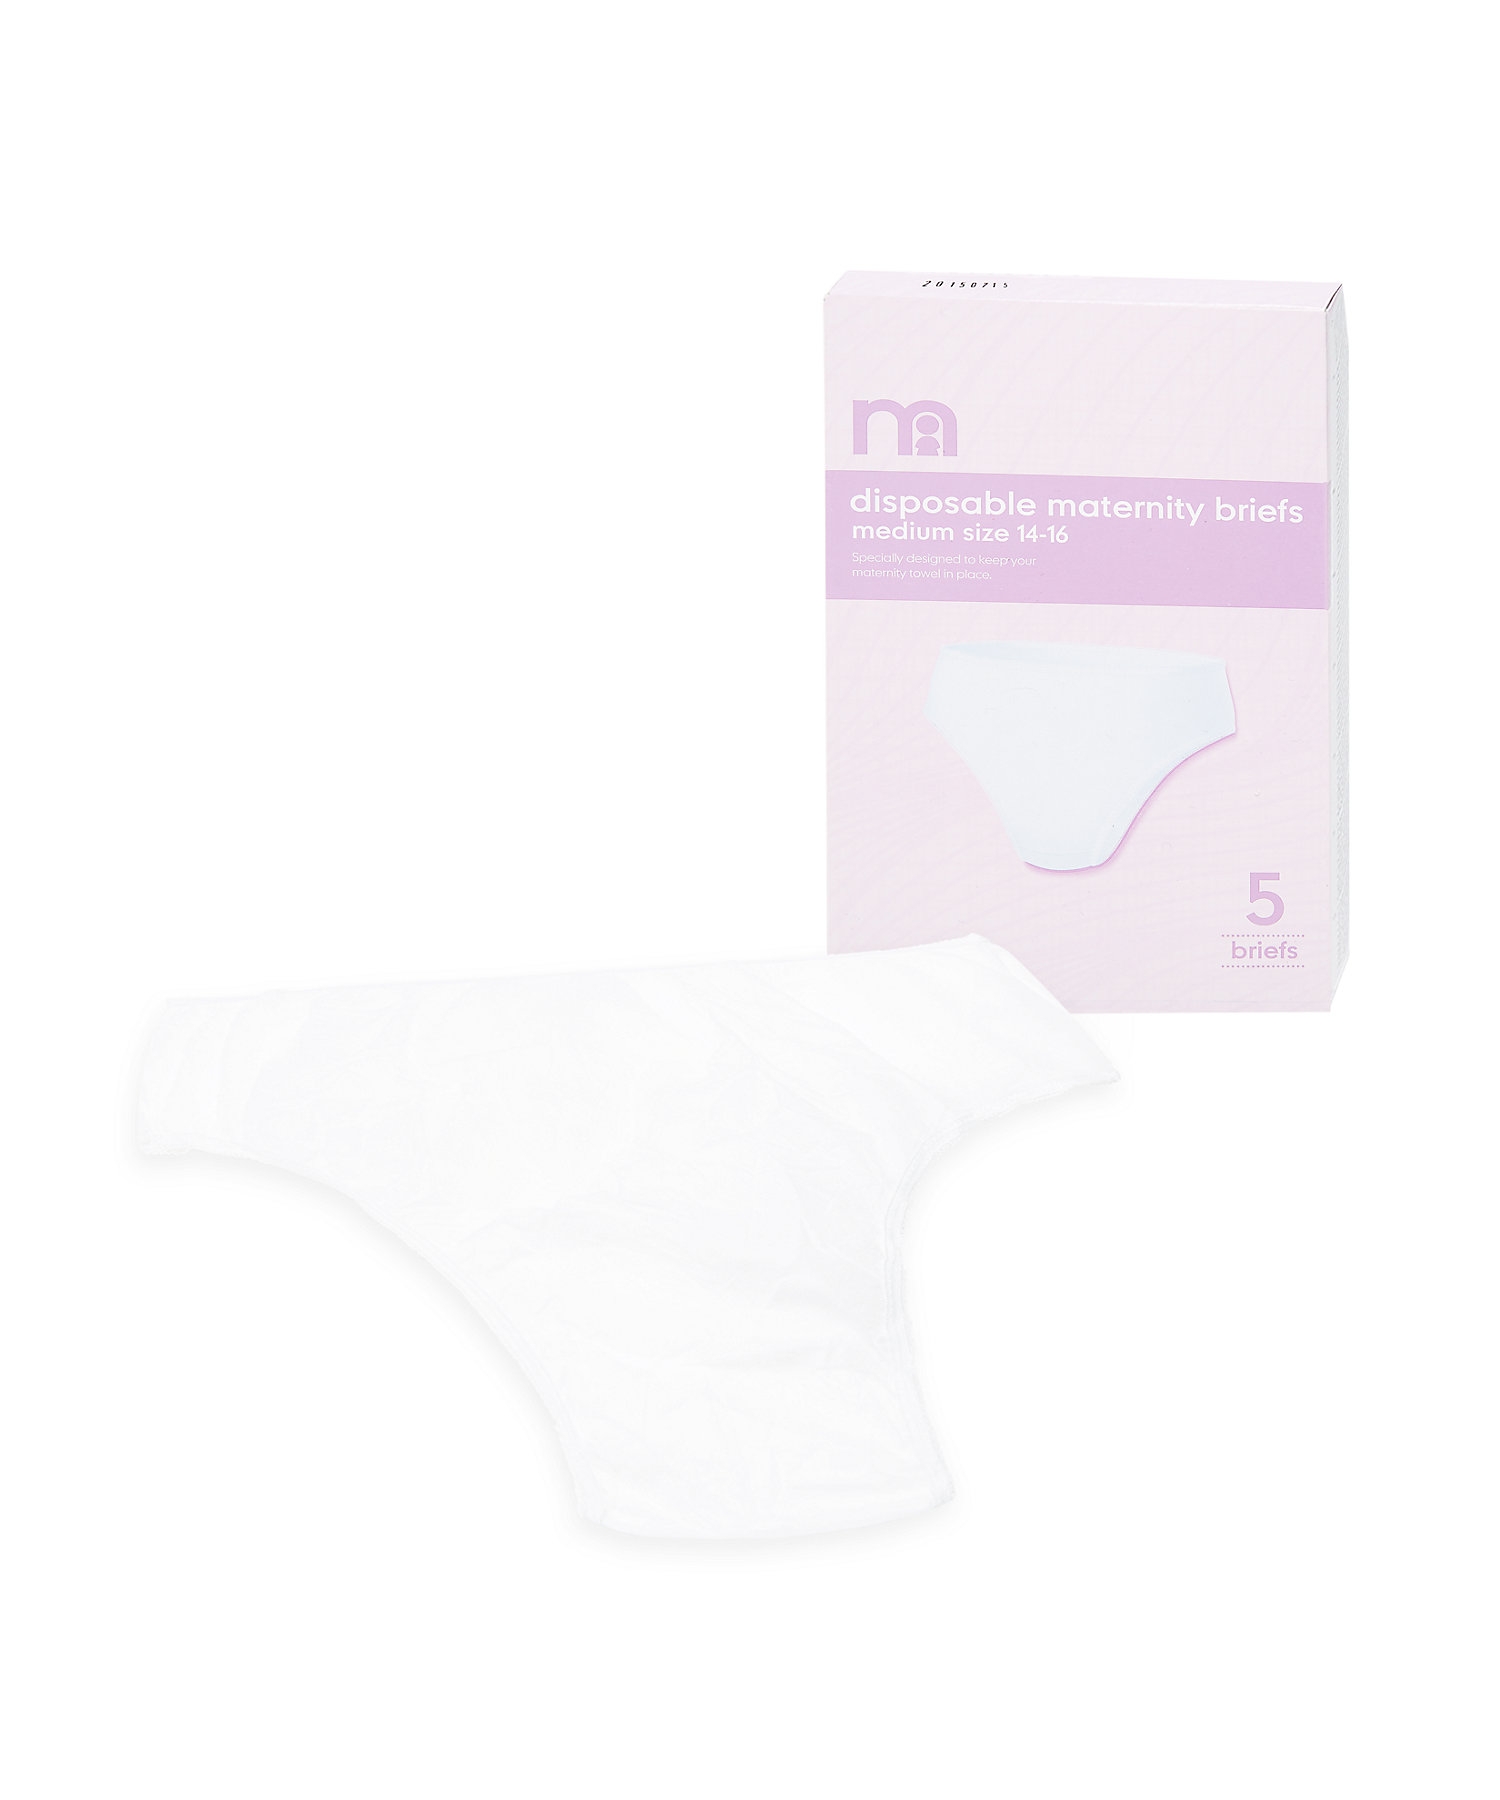 Mothercare | Disposable Maternity Briefs Medium (Size 14-16) - Pack of 5